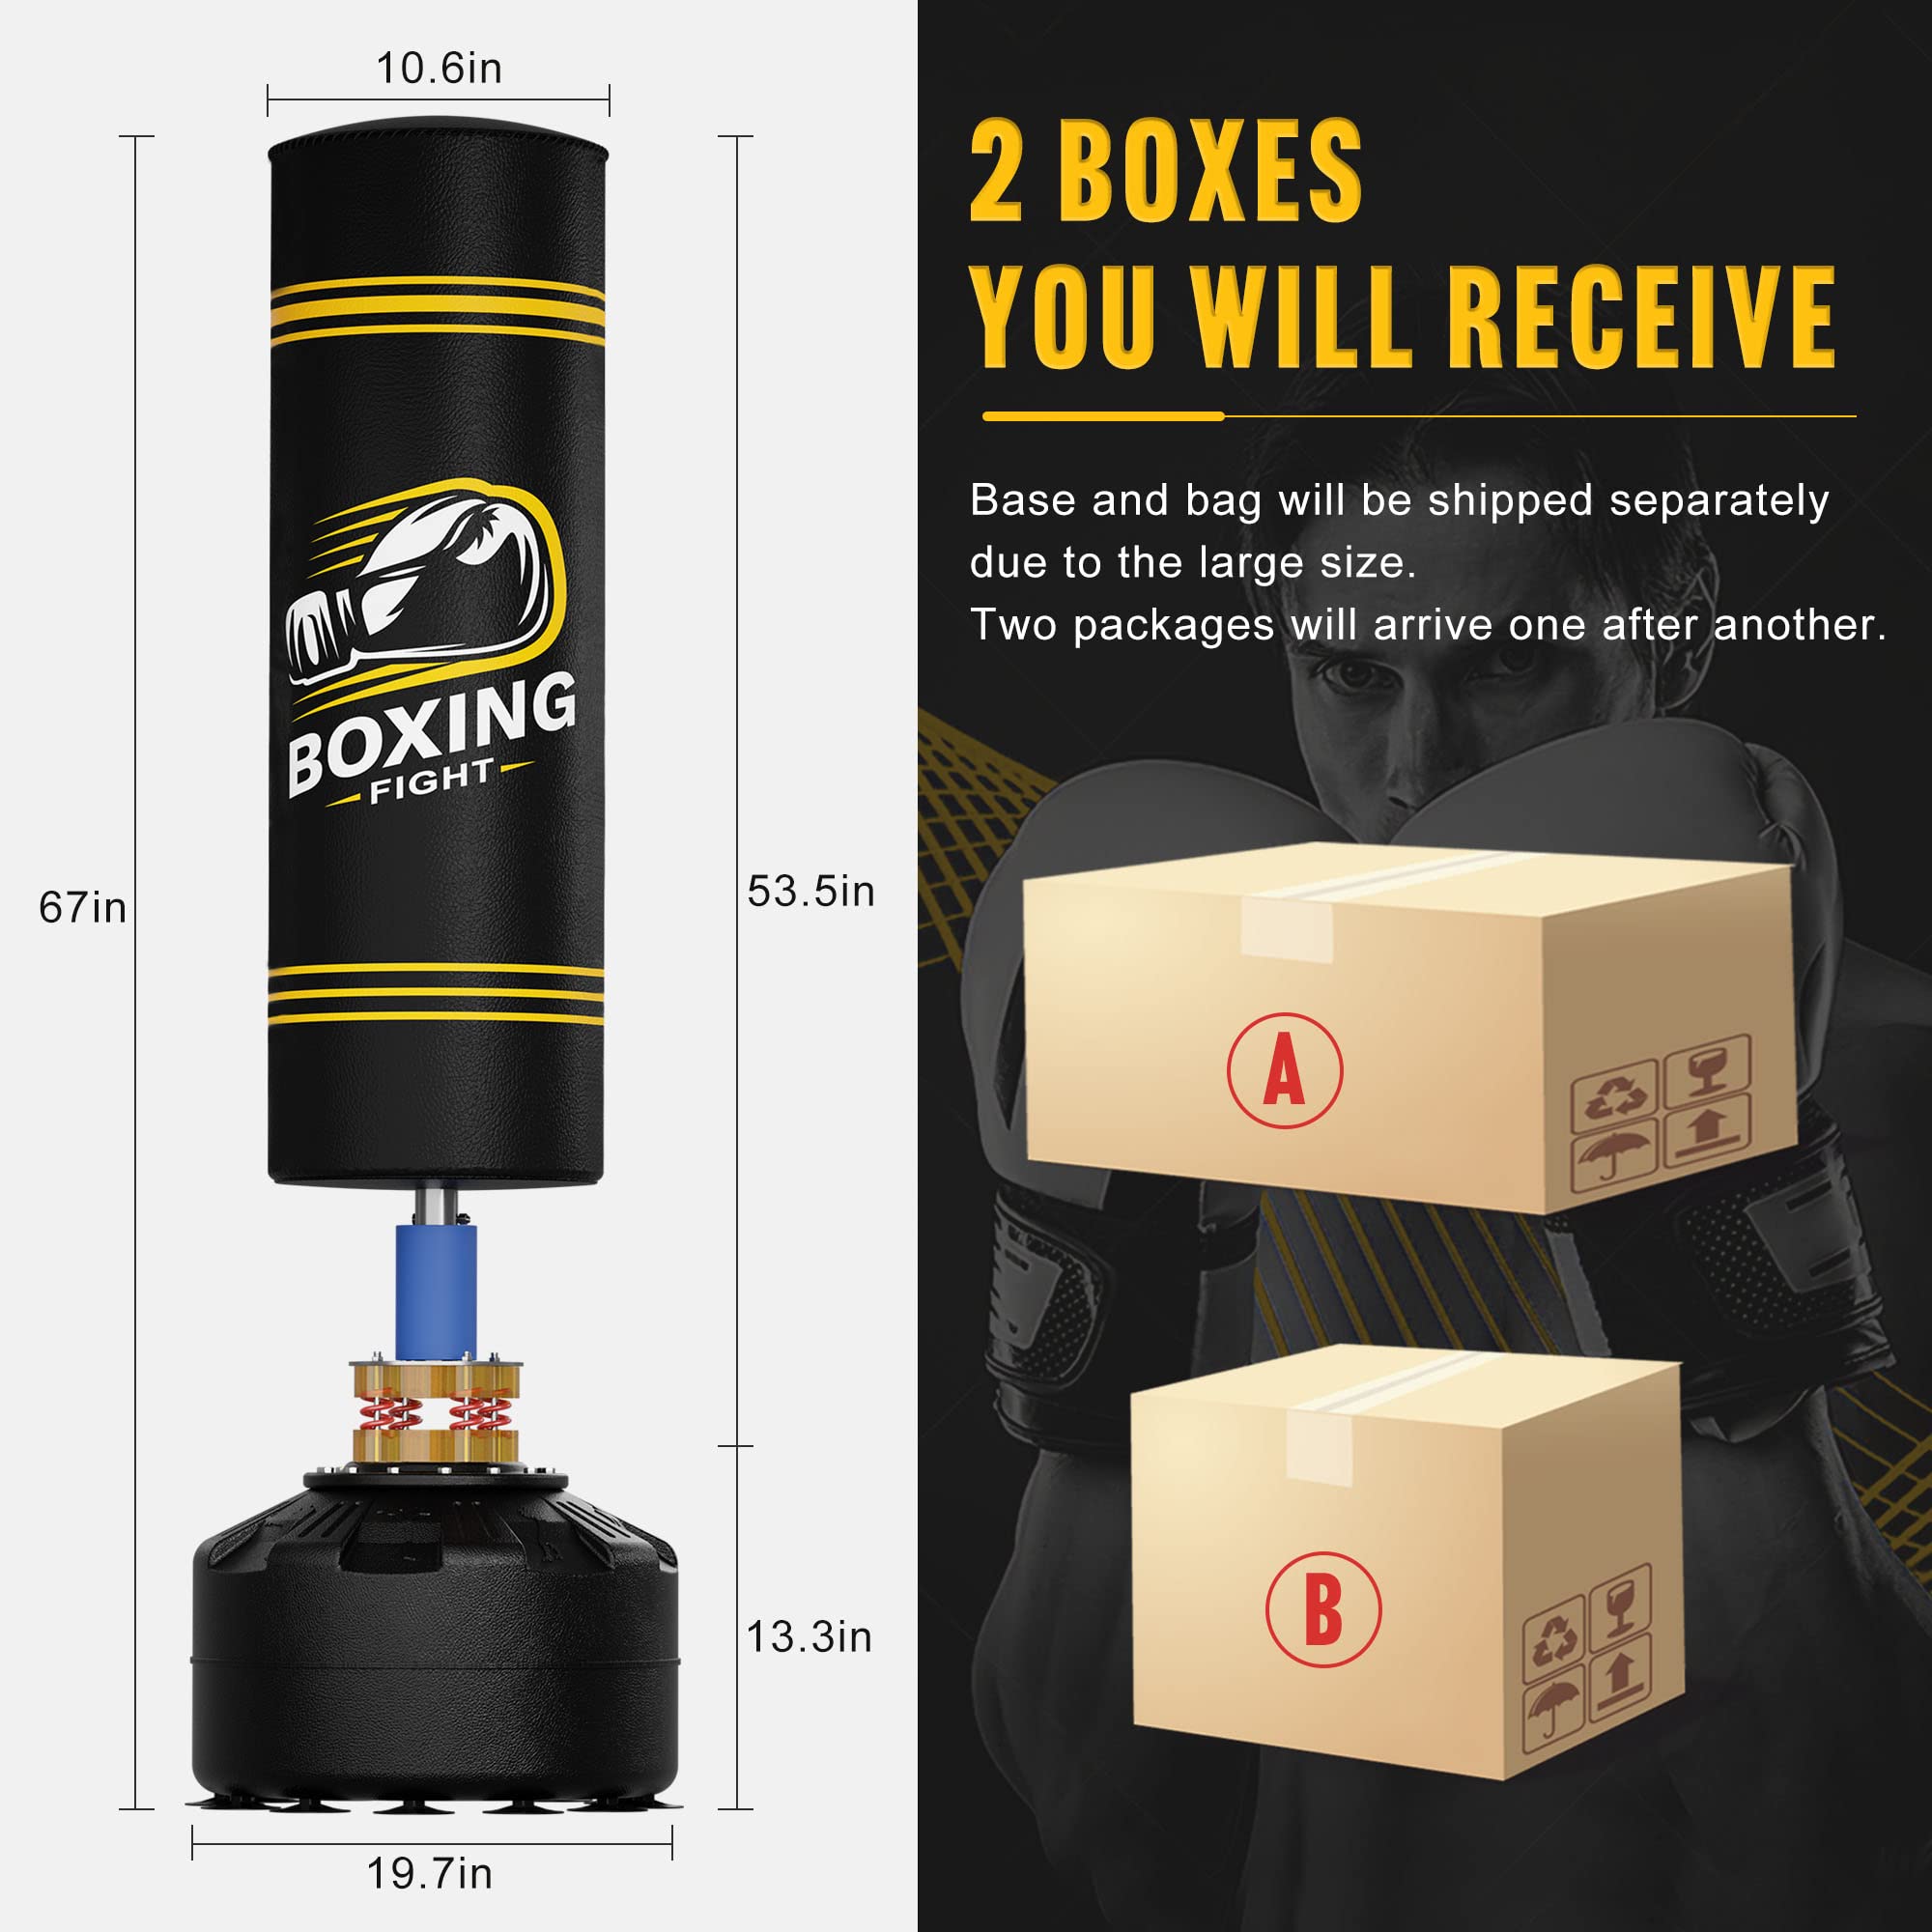 5 Pro Tips To Take Your Punching Bag Workout Up A Level